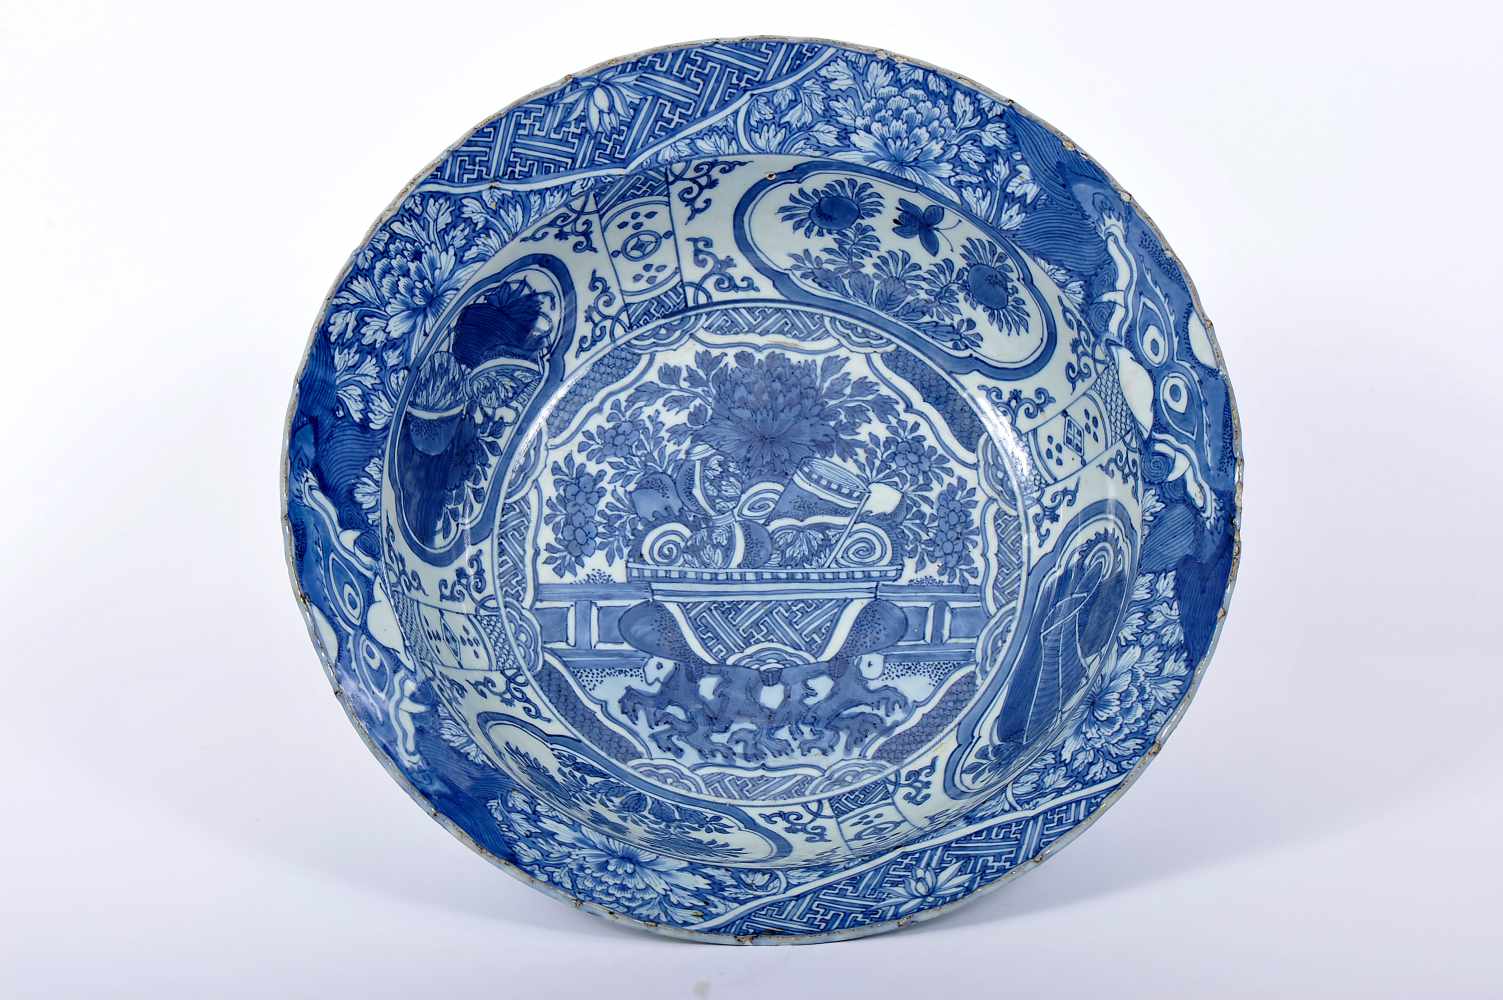 A Large Bowl, Chinese export Kraak porcelain, blue decoration "Bowl with flowers", boiler with - Image 2 of 2